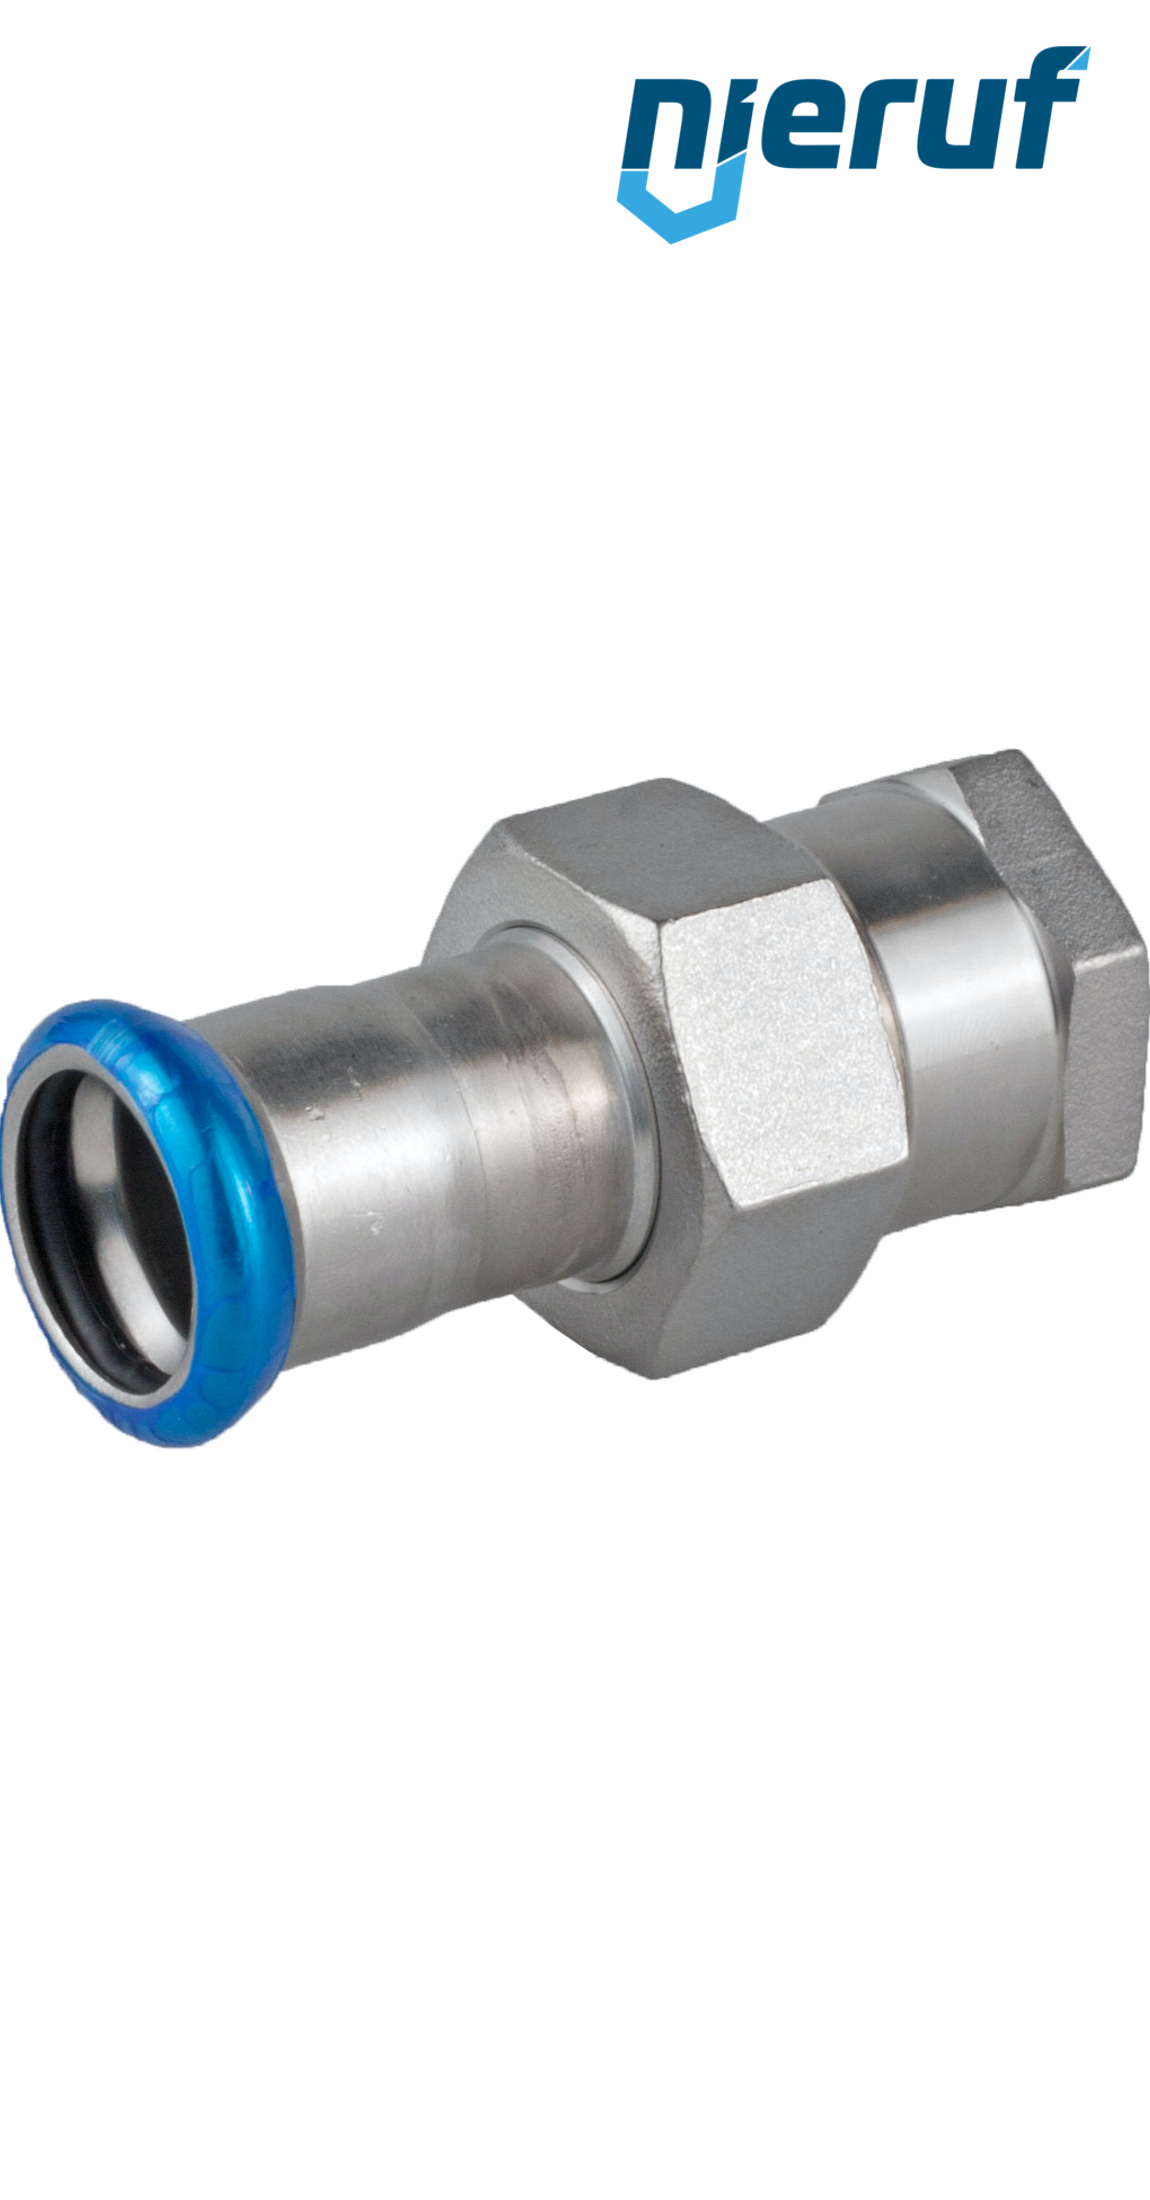 Union Coupling Pressfitting F DN15 - 18,0 mm female thread 3/4" inch stainless steel